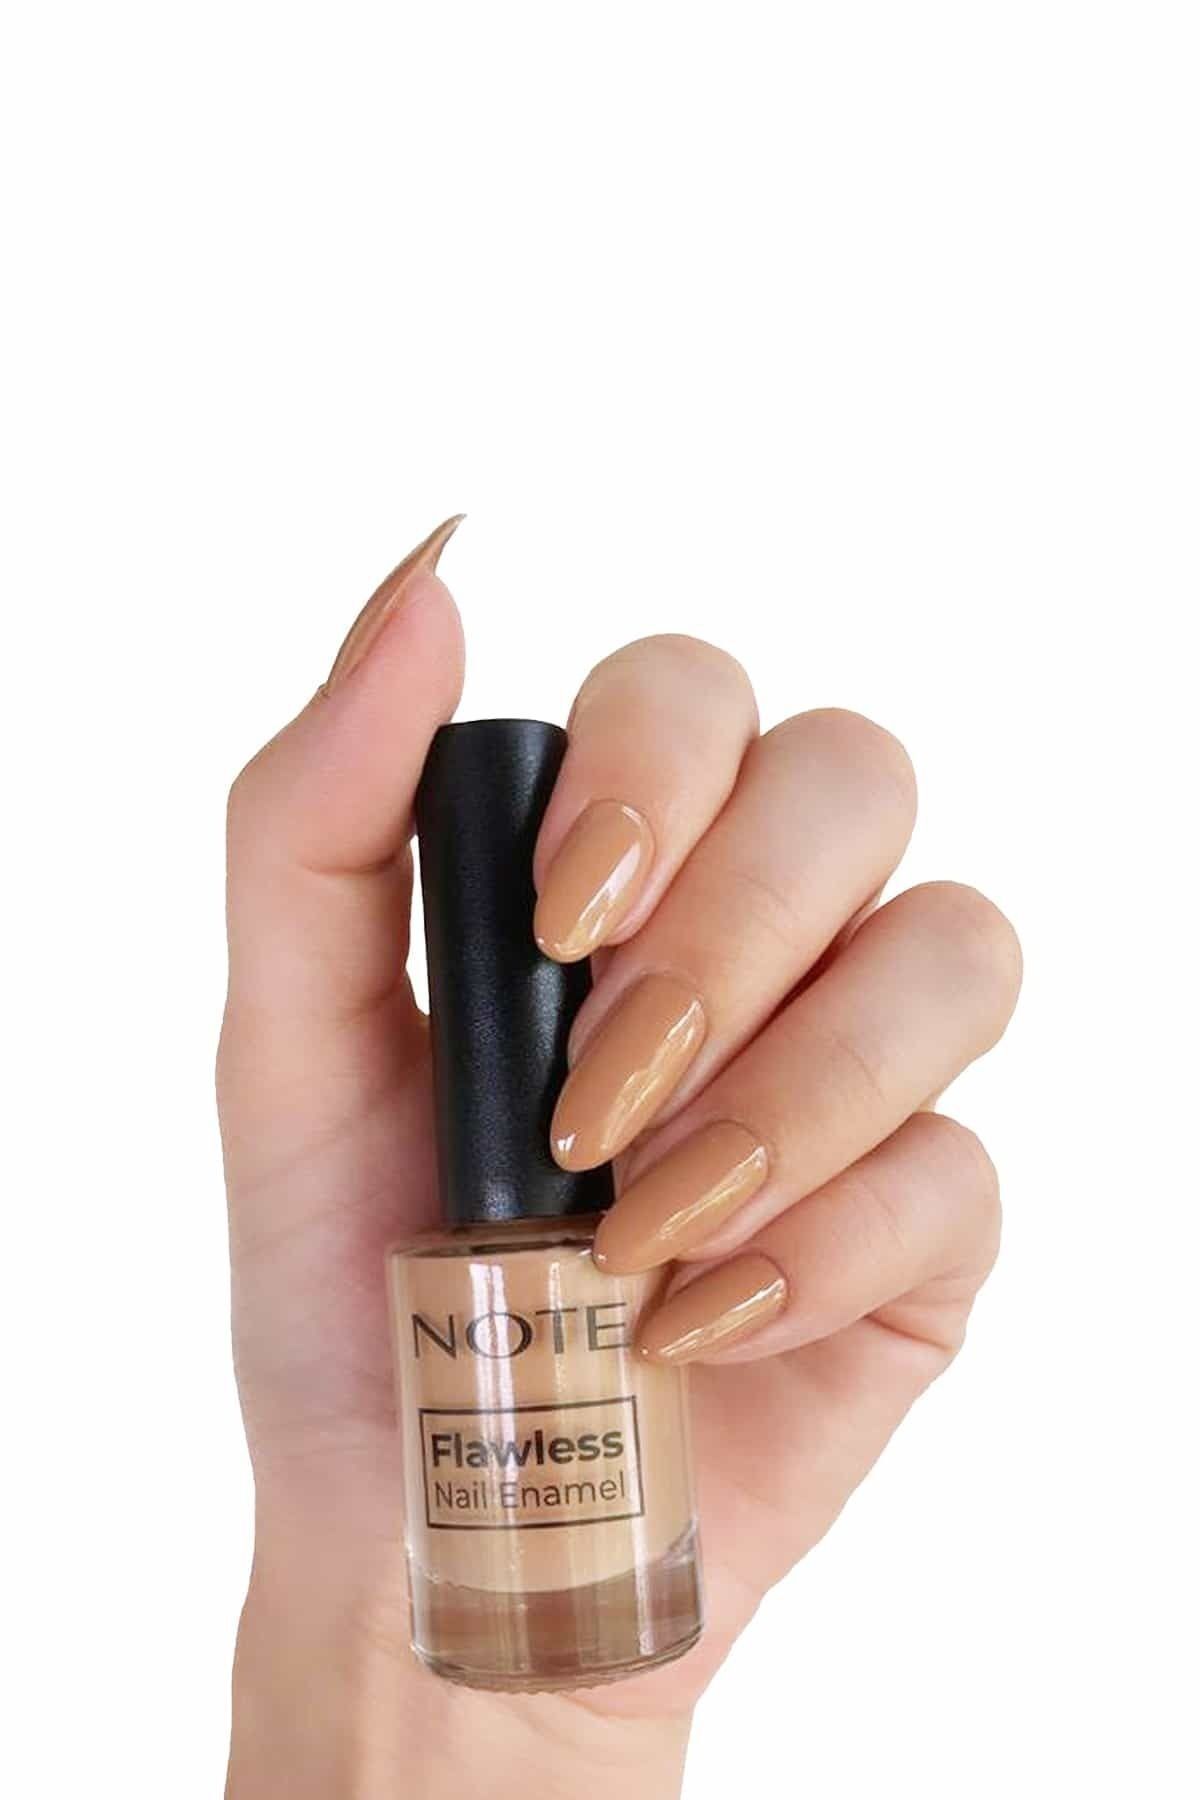 Note Cosmetics Nail Flawless Oje 51 Smoothie - Nude